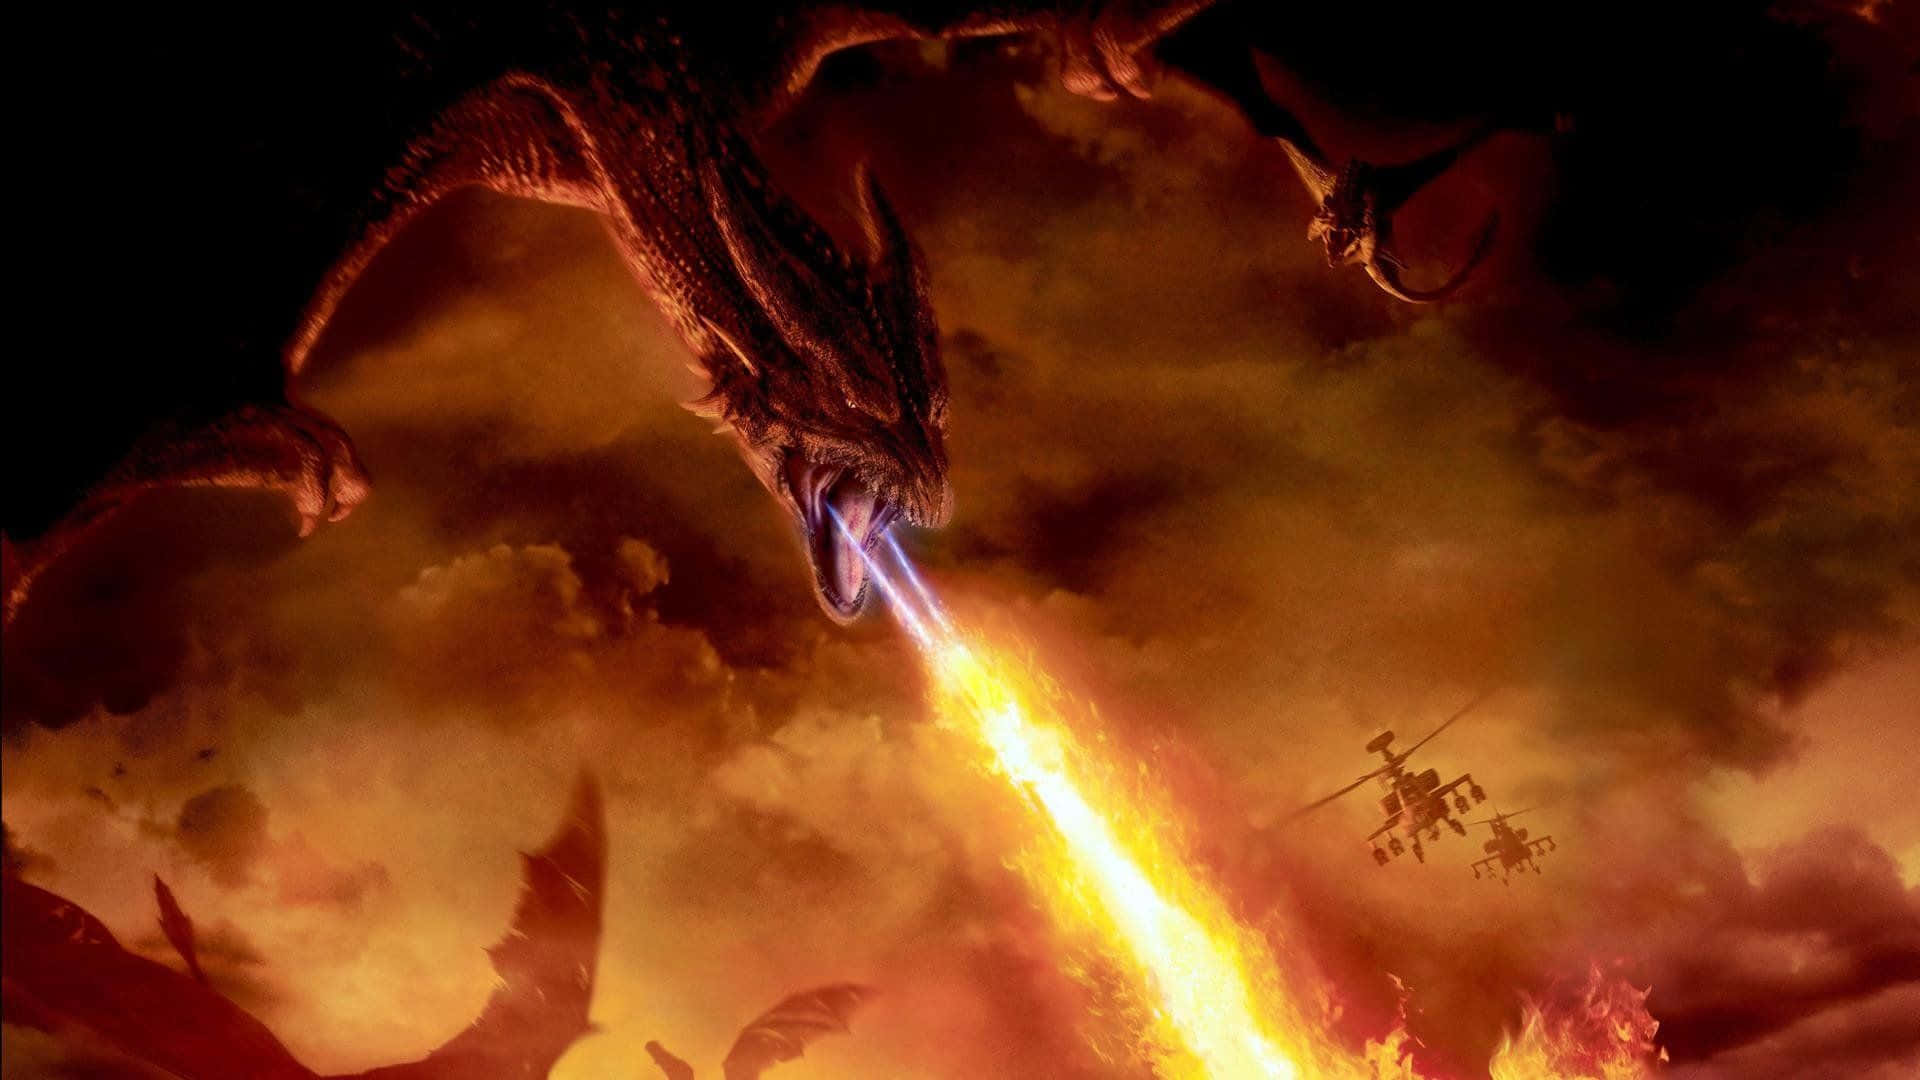 the dragon fires a flame at a man